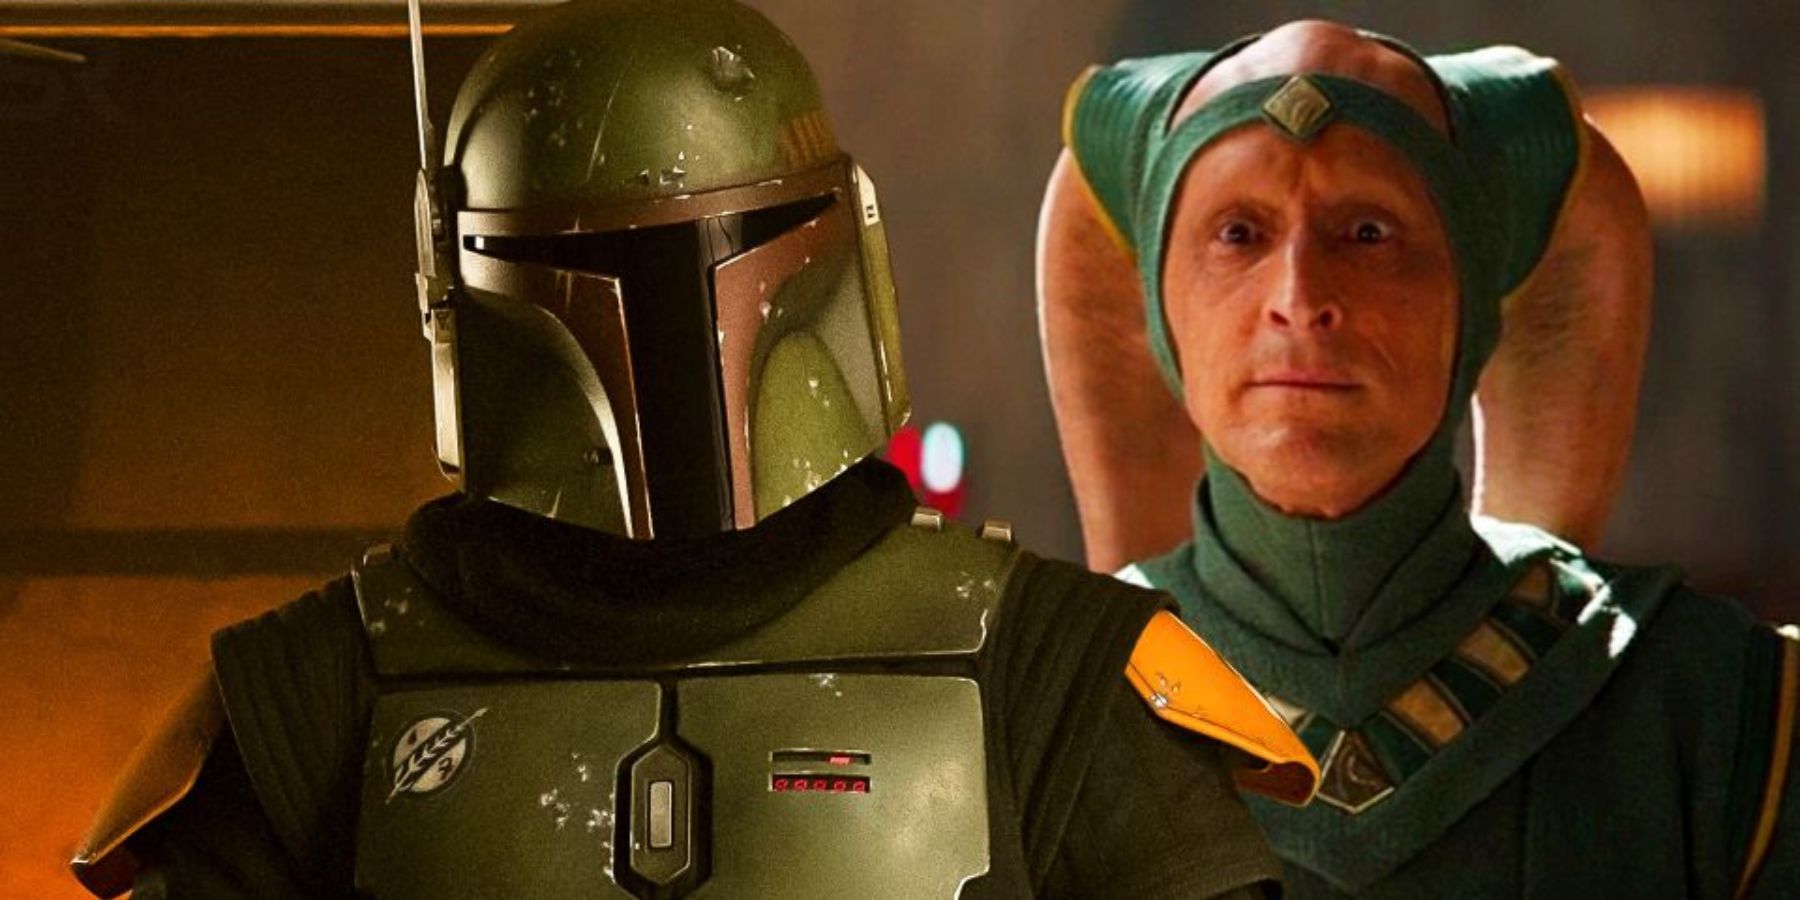 The Book Of Boba Fett Episode 2 Review